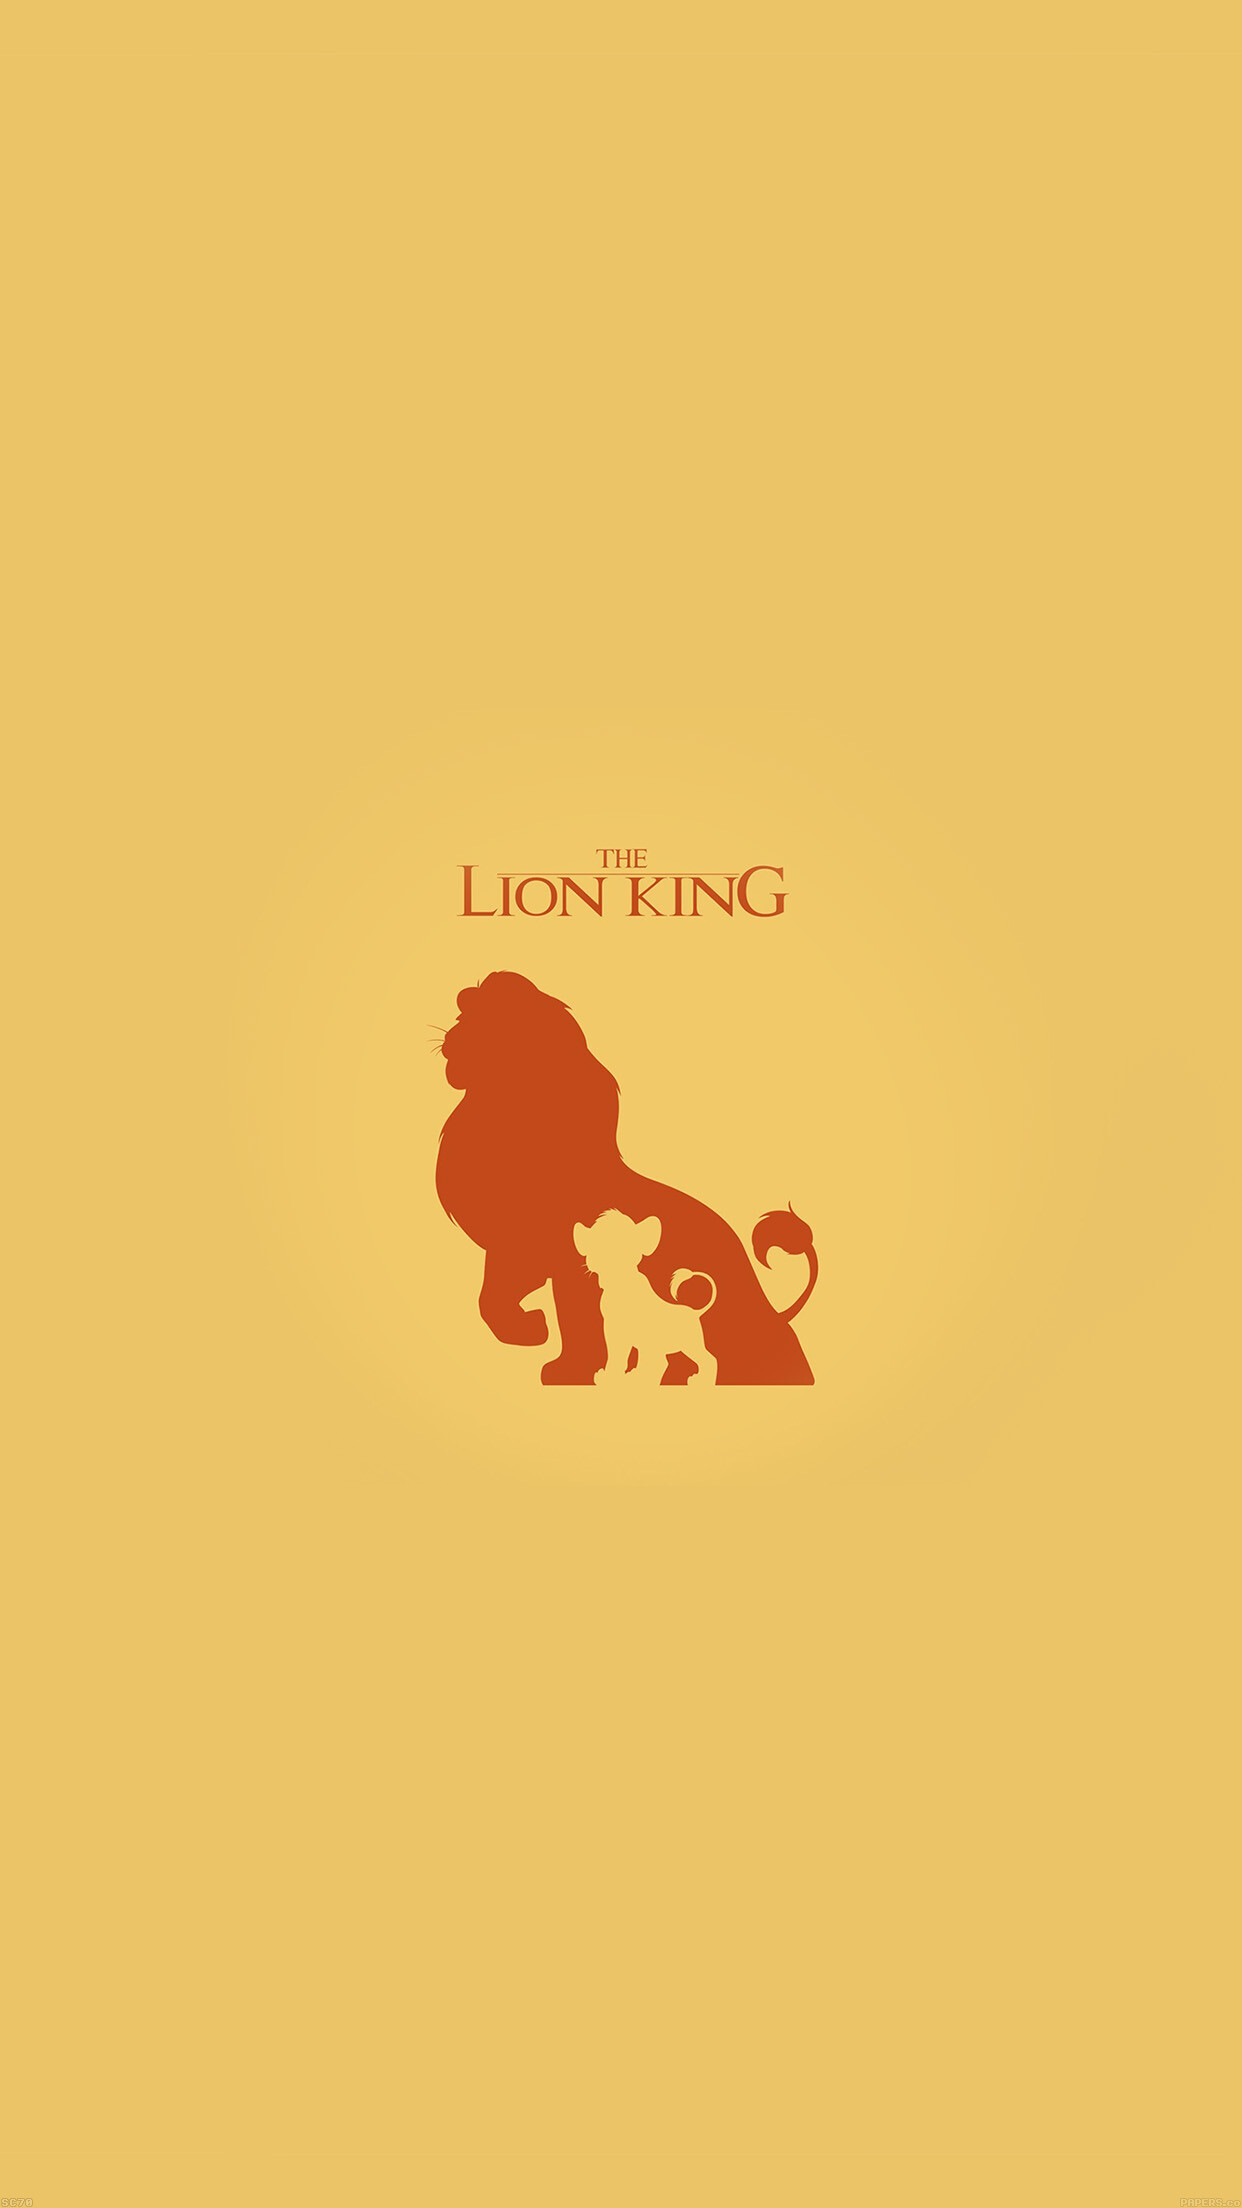 The Lion King: The prequel to Disney's 2019 "live-action" remake of the animated classic, Minimalistic. 1250x2210 HD Wallpaper.